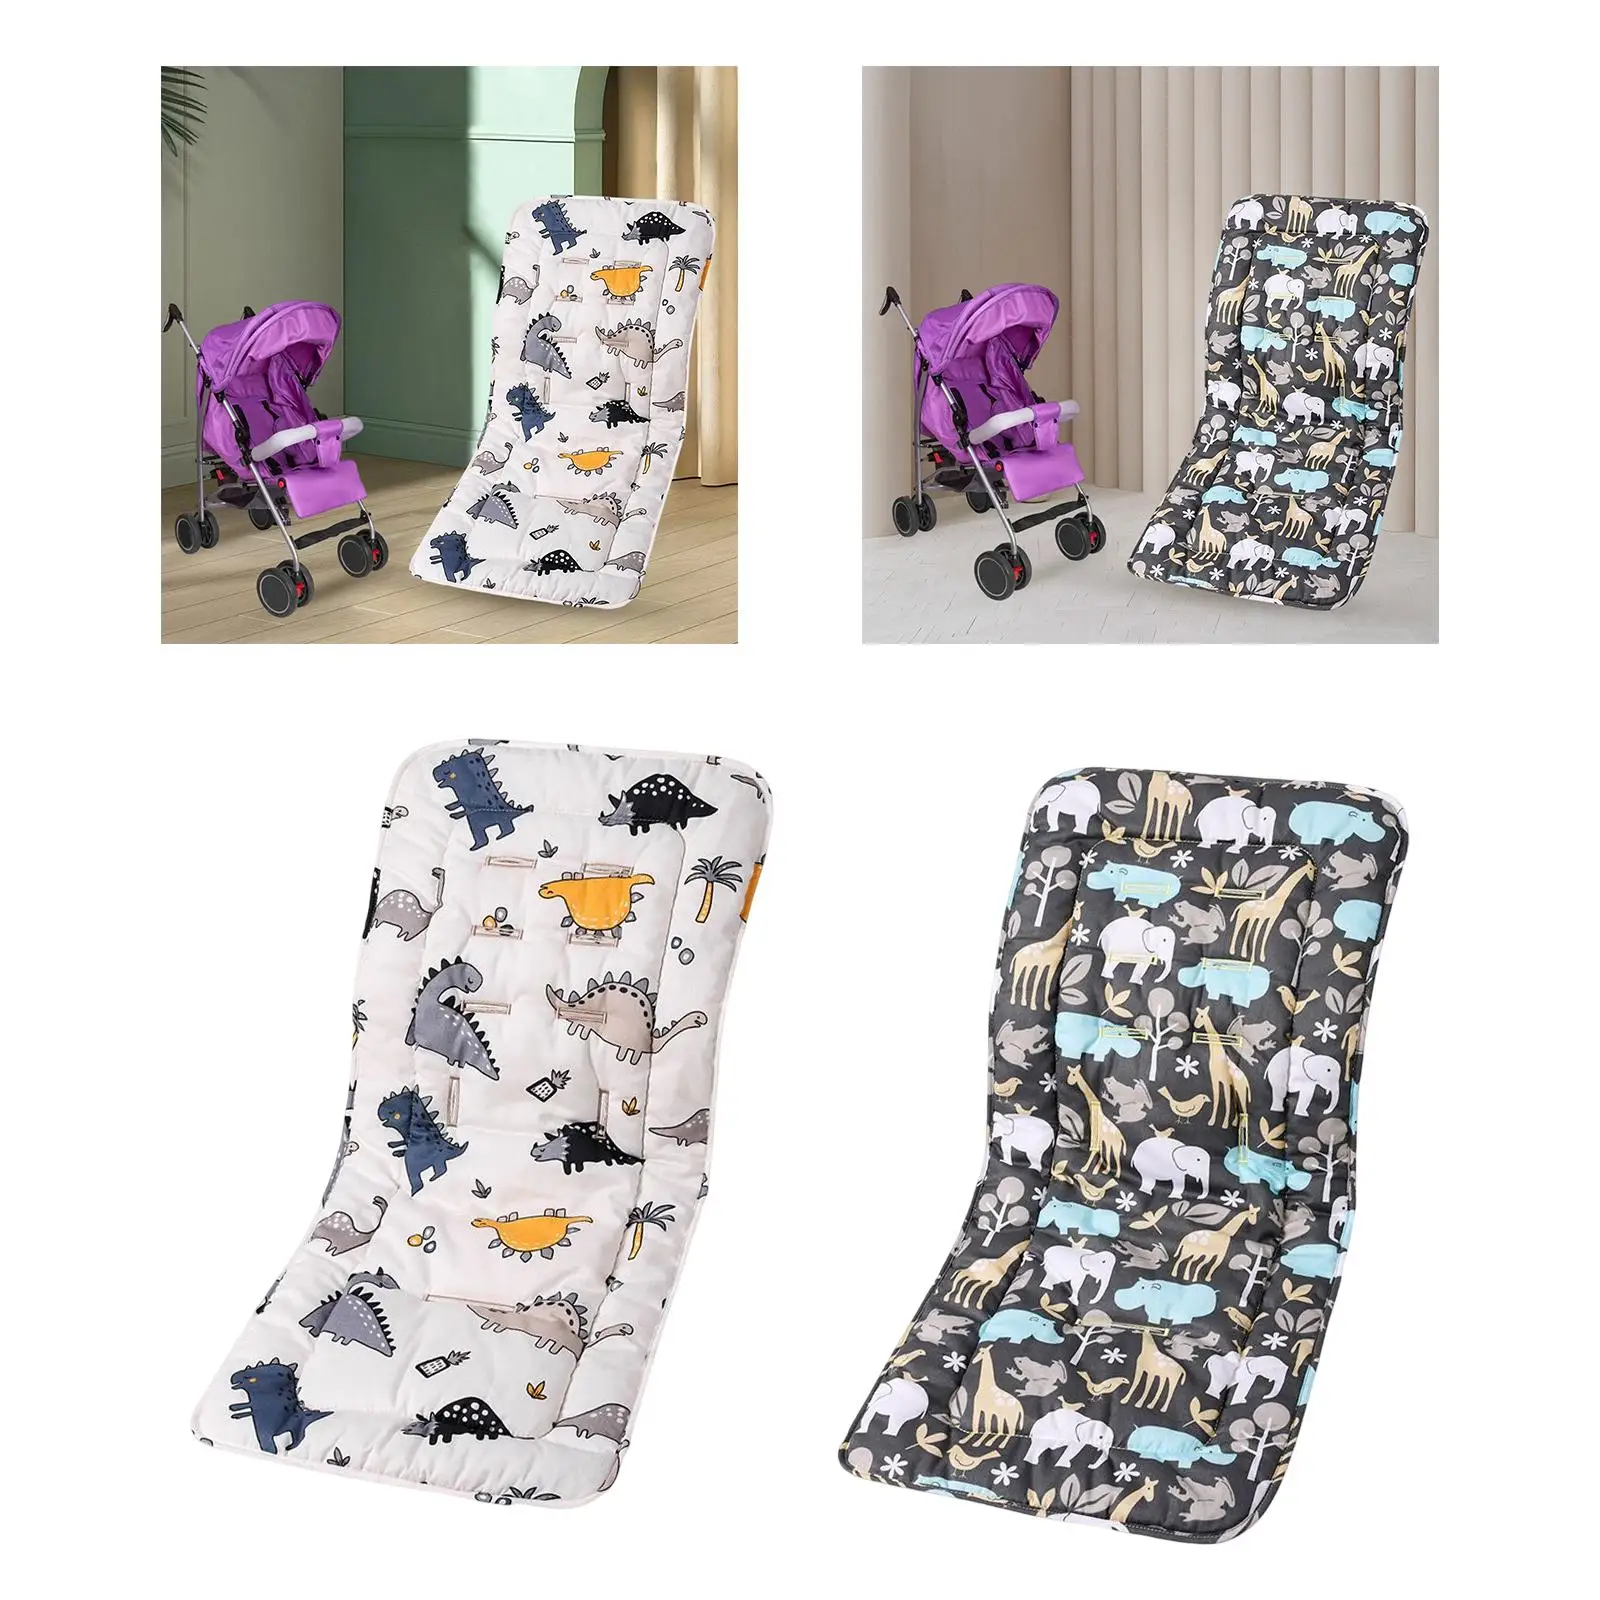 Universal Stroller Cushion Breathable Pram Seat Cushion Stroller Mat Seat Liners for Pushchair Stroller Buggy Pram Accessories